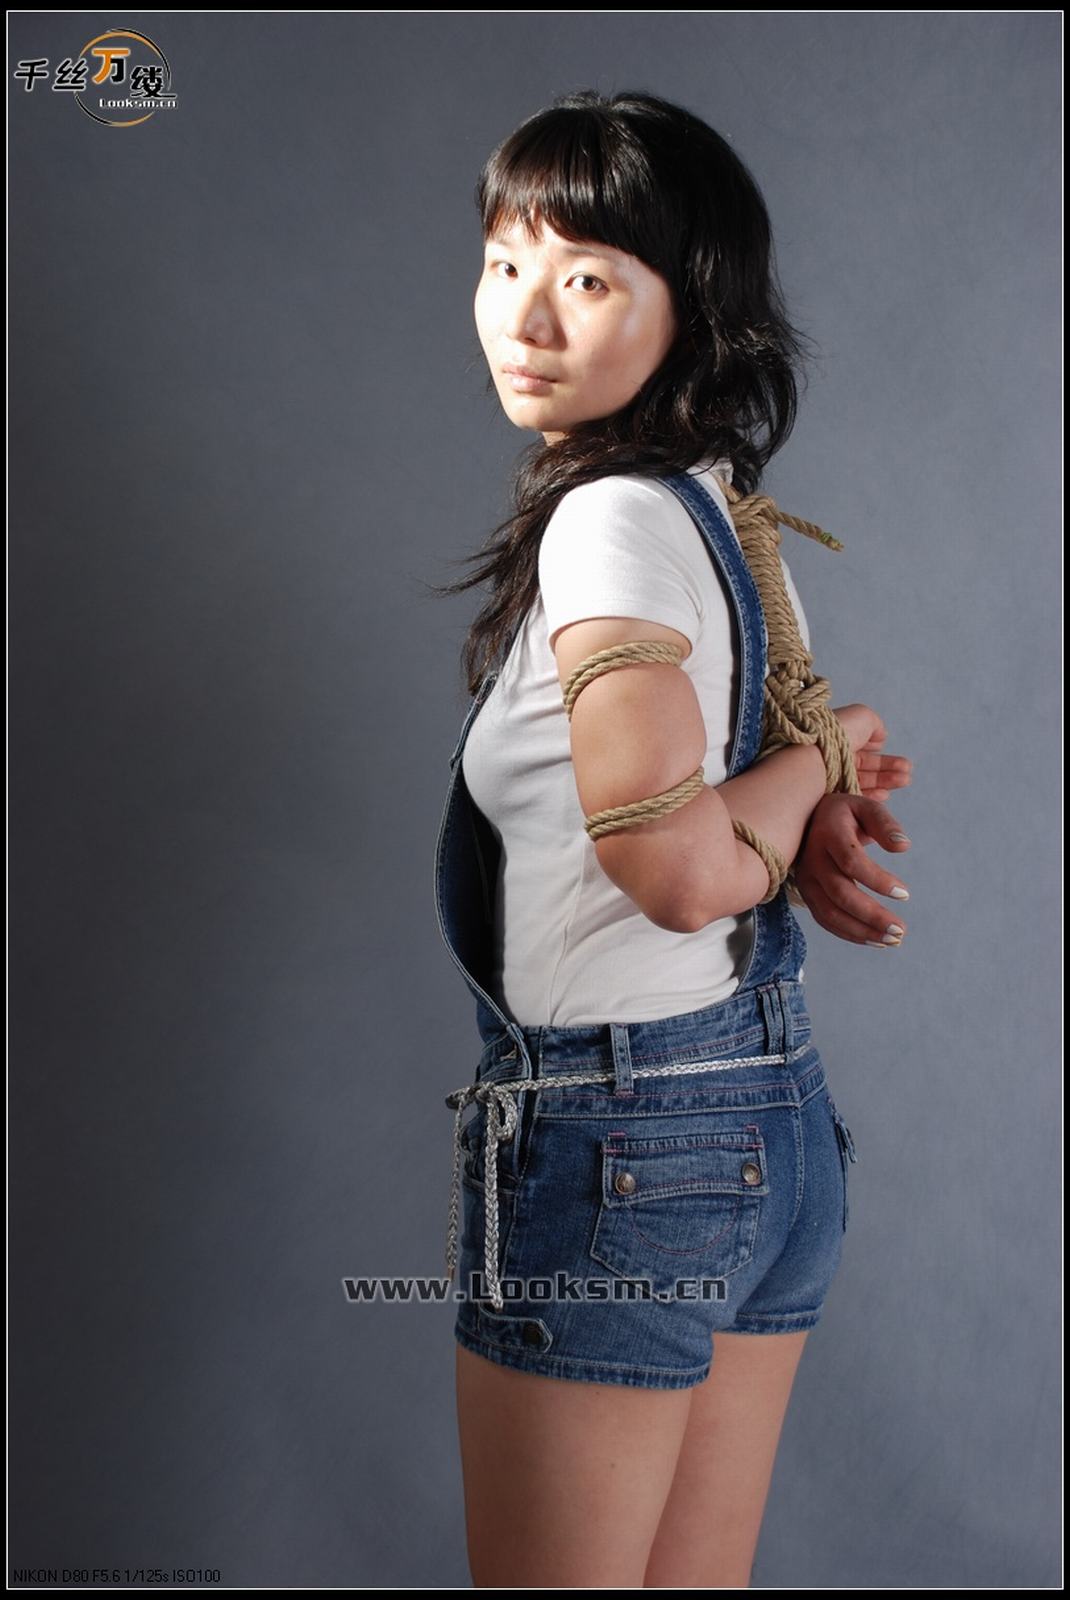 Chinese Rope Model 2